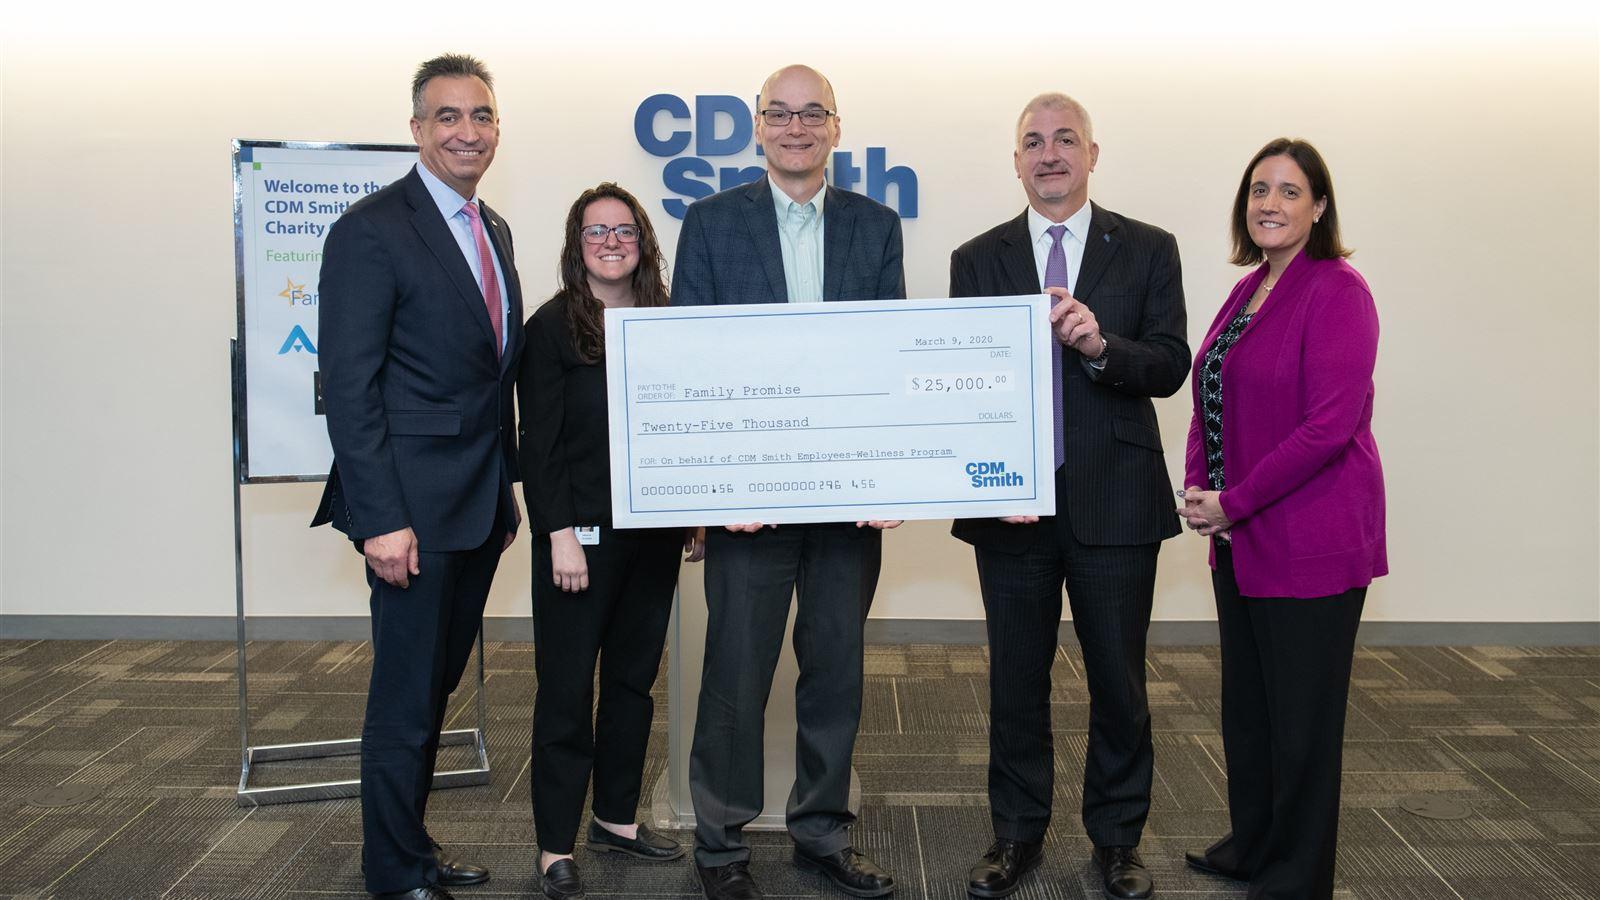 CDM Smith presents a $25,000 check to Claas Ehlers, Chief Executive Officer of Family Promise.